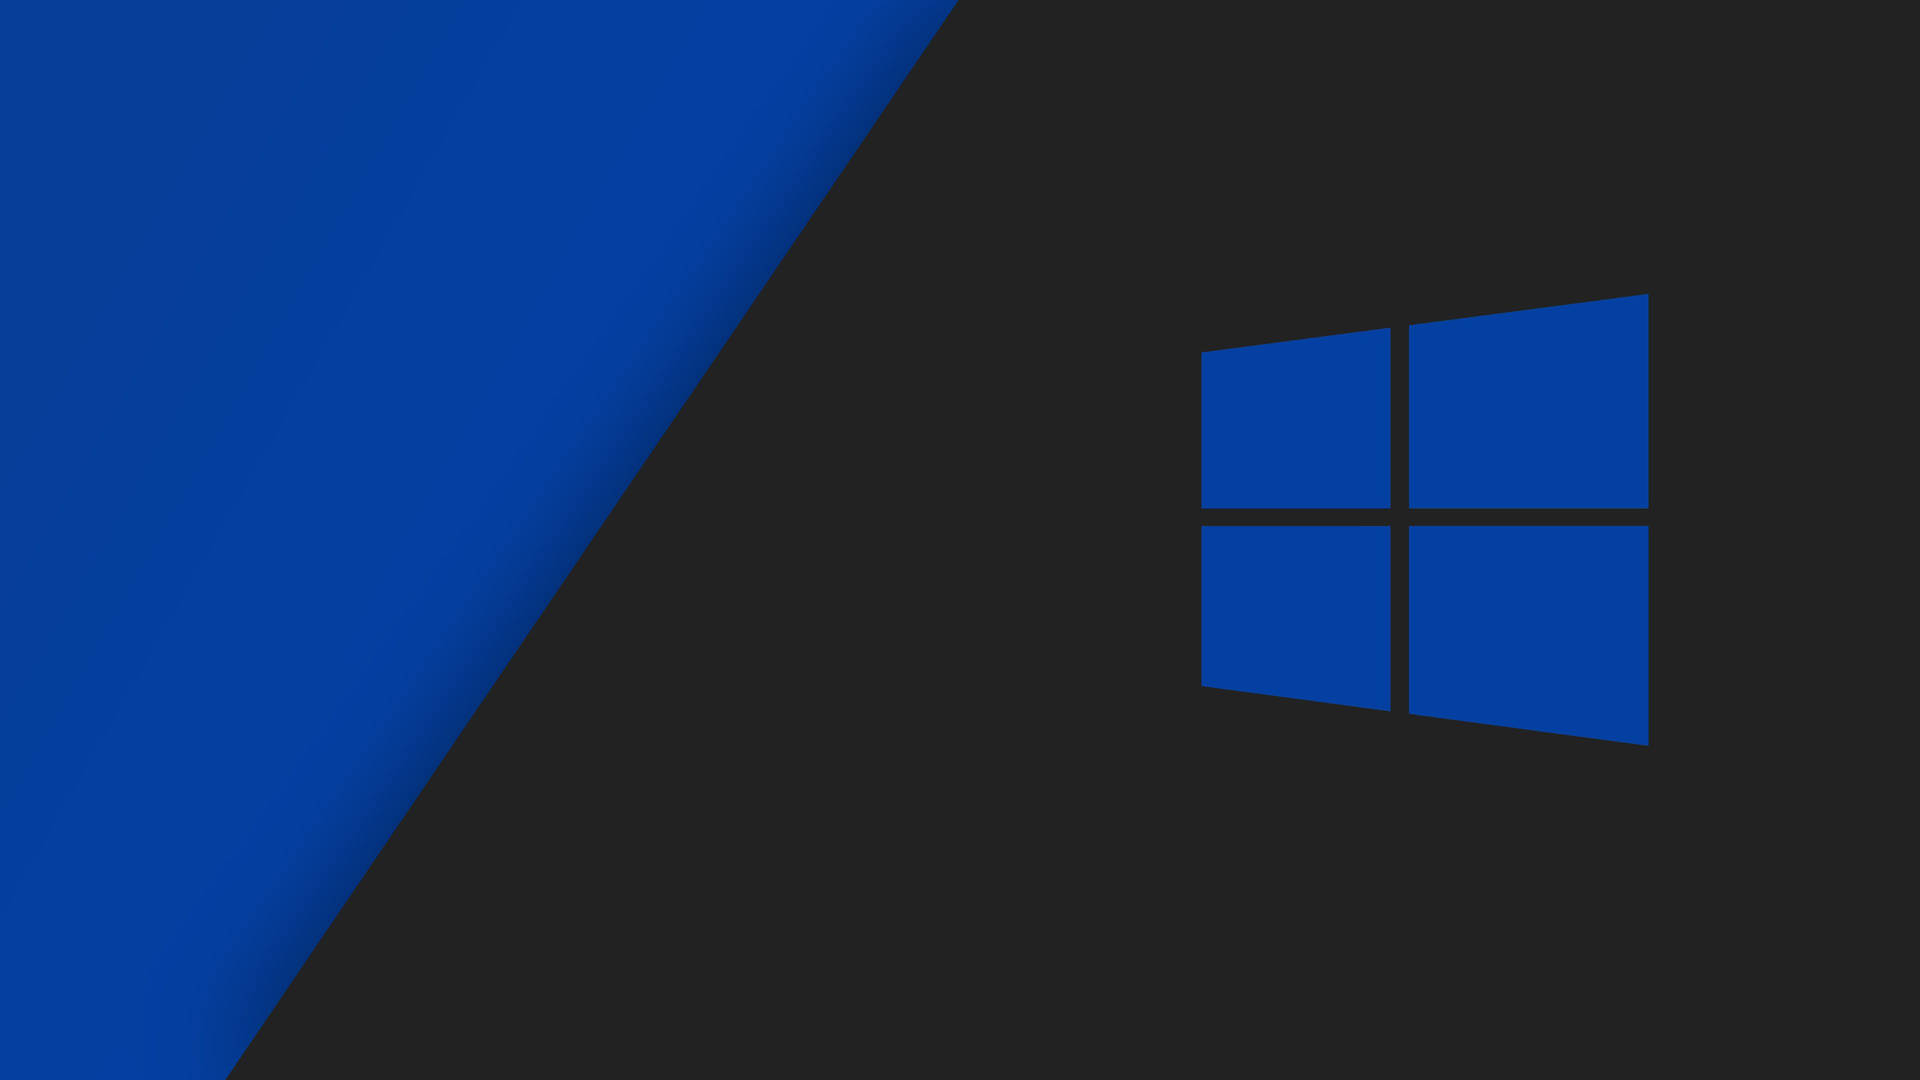 Windows 10 Hd Black And Blue Background